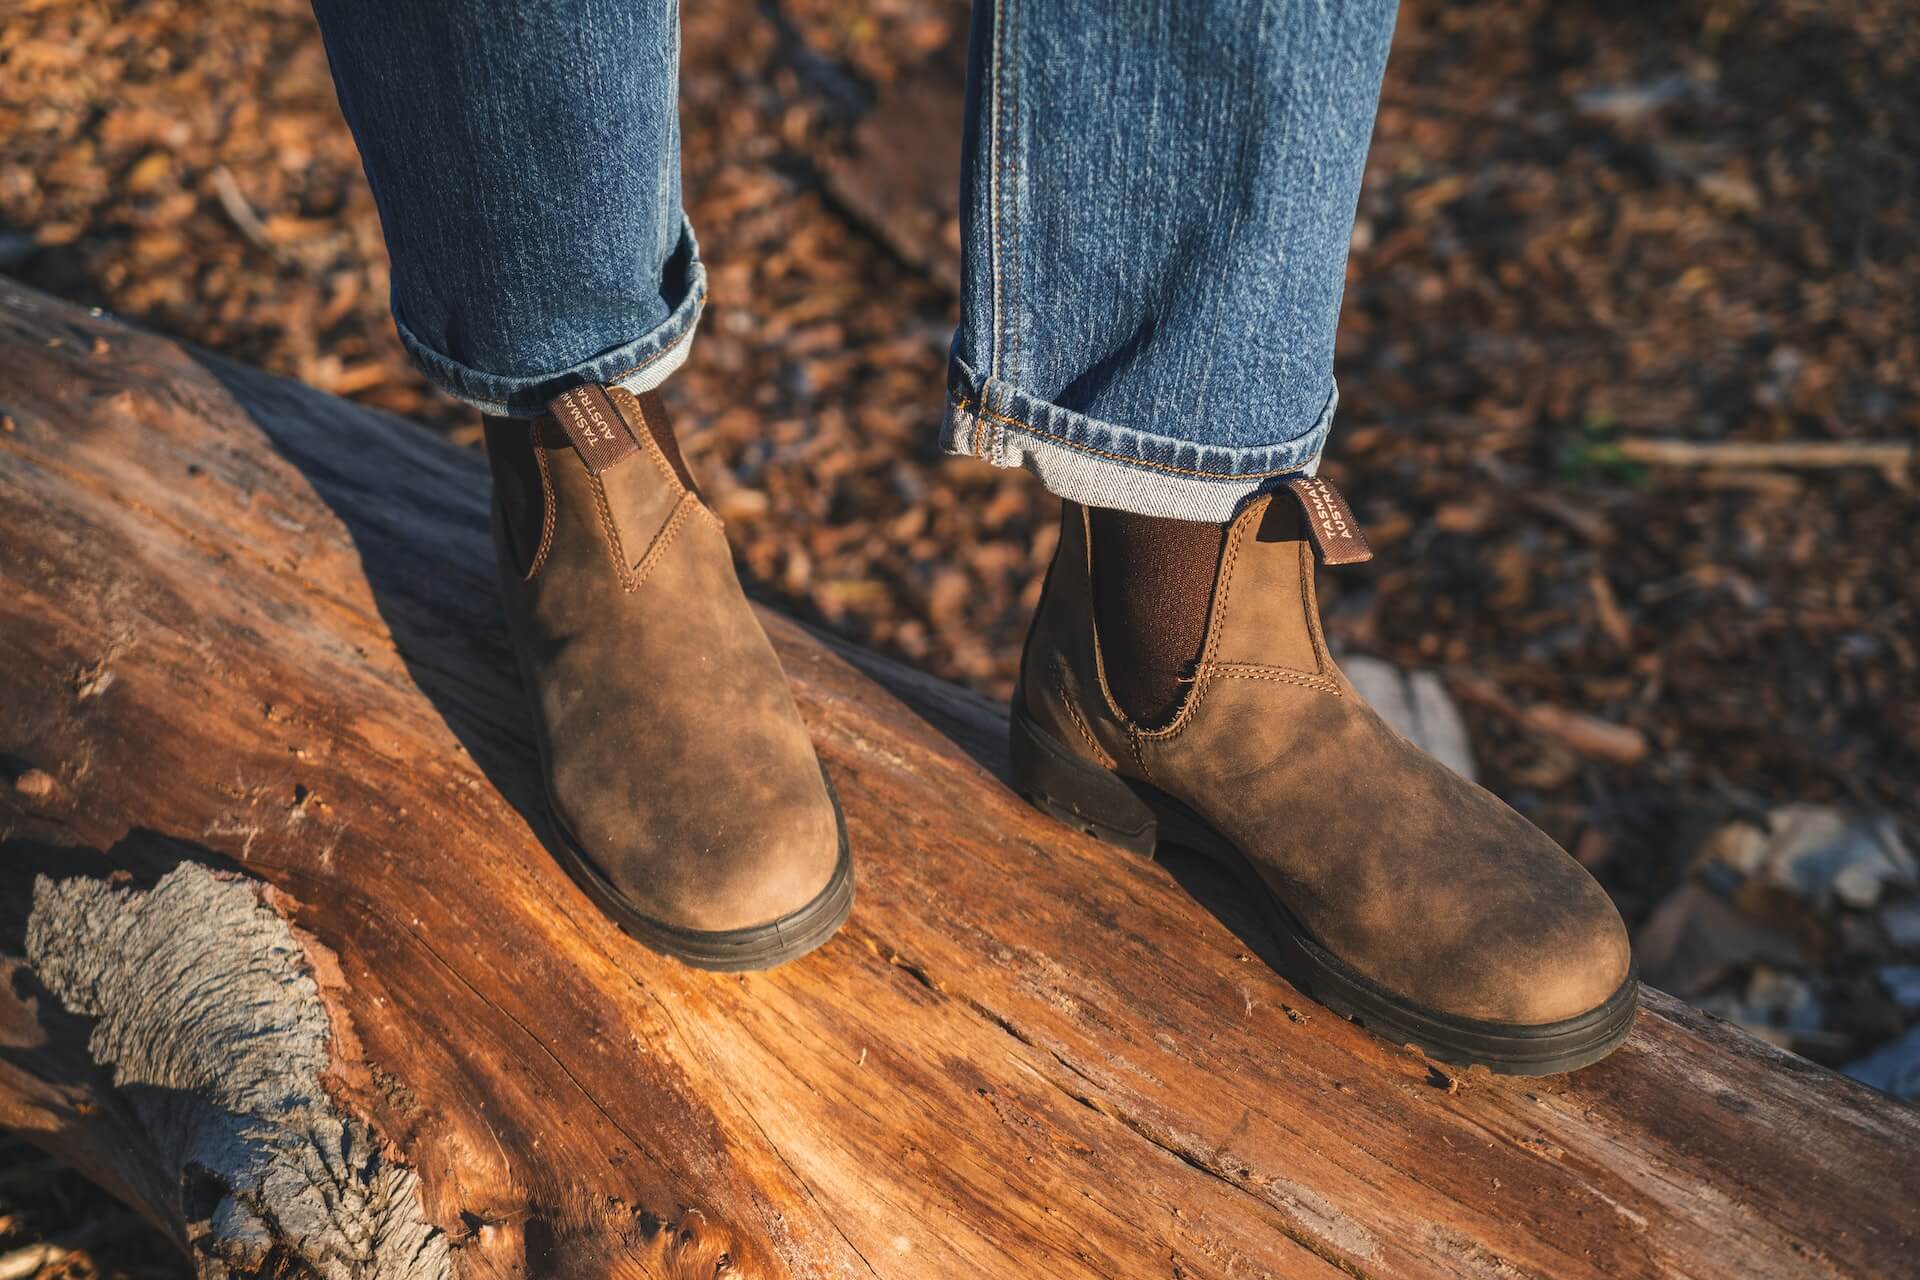 Best Barefoot Chelsea Boot That Don't Squash Toes